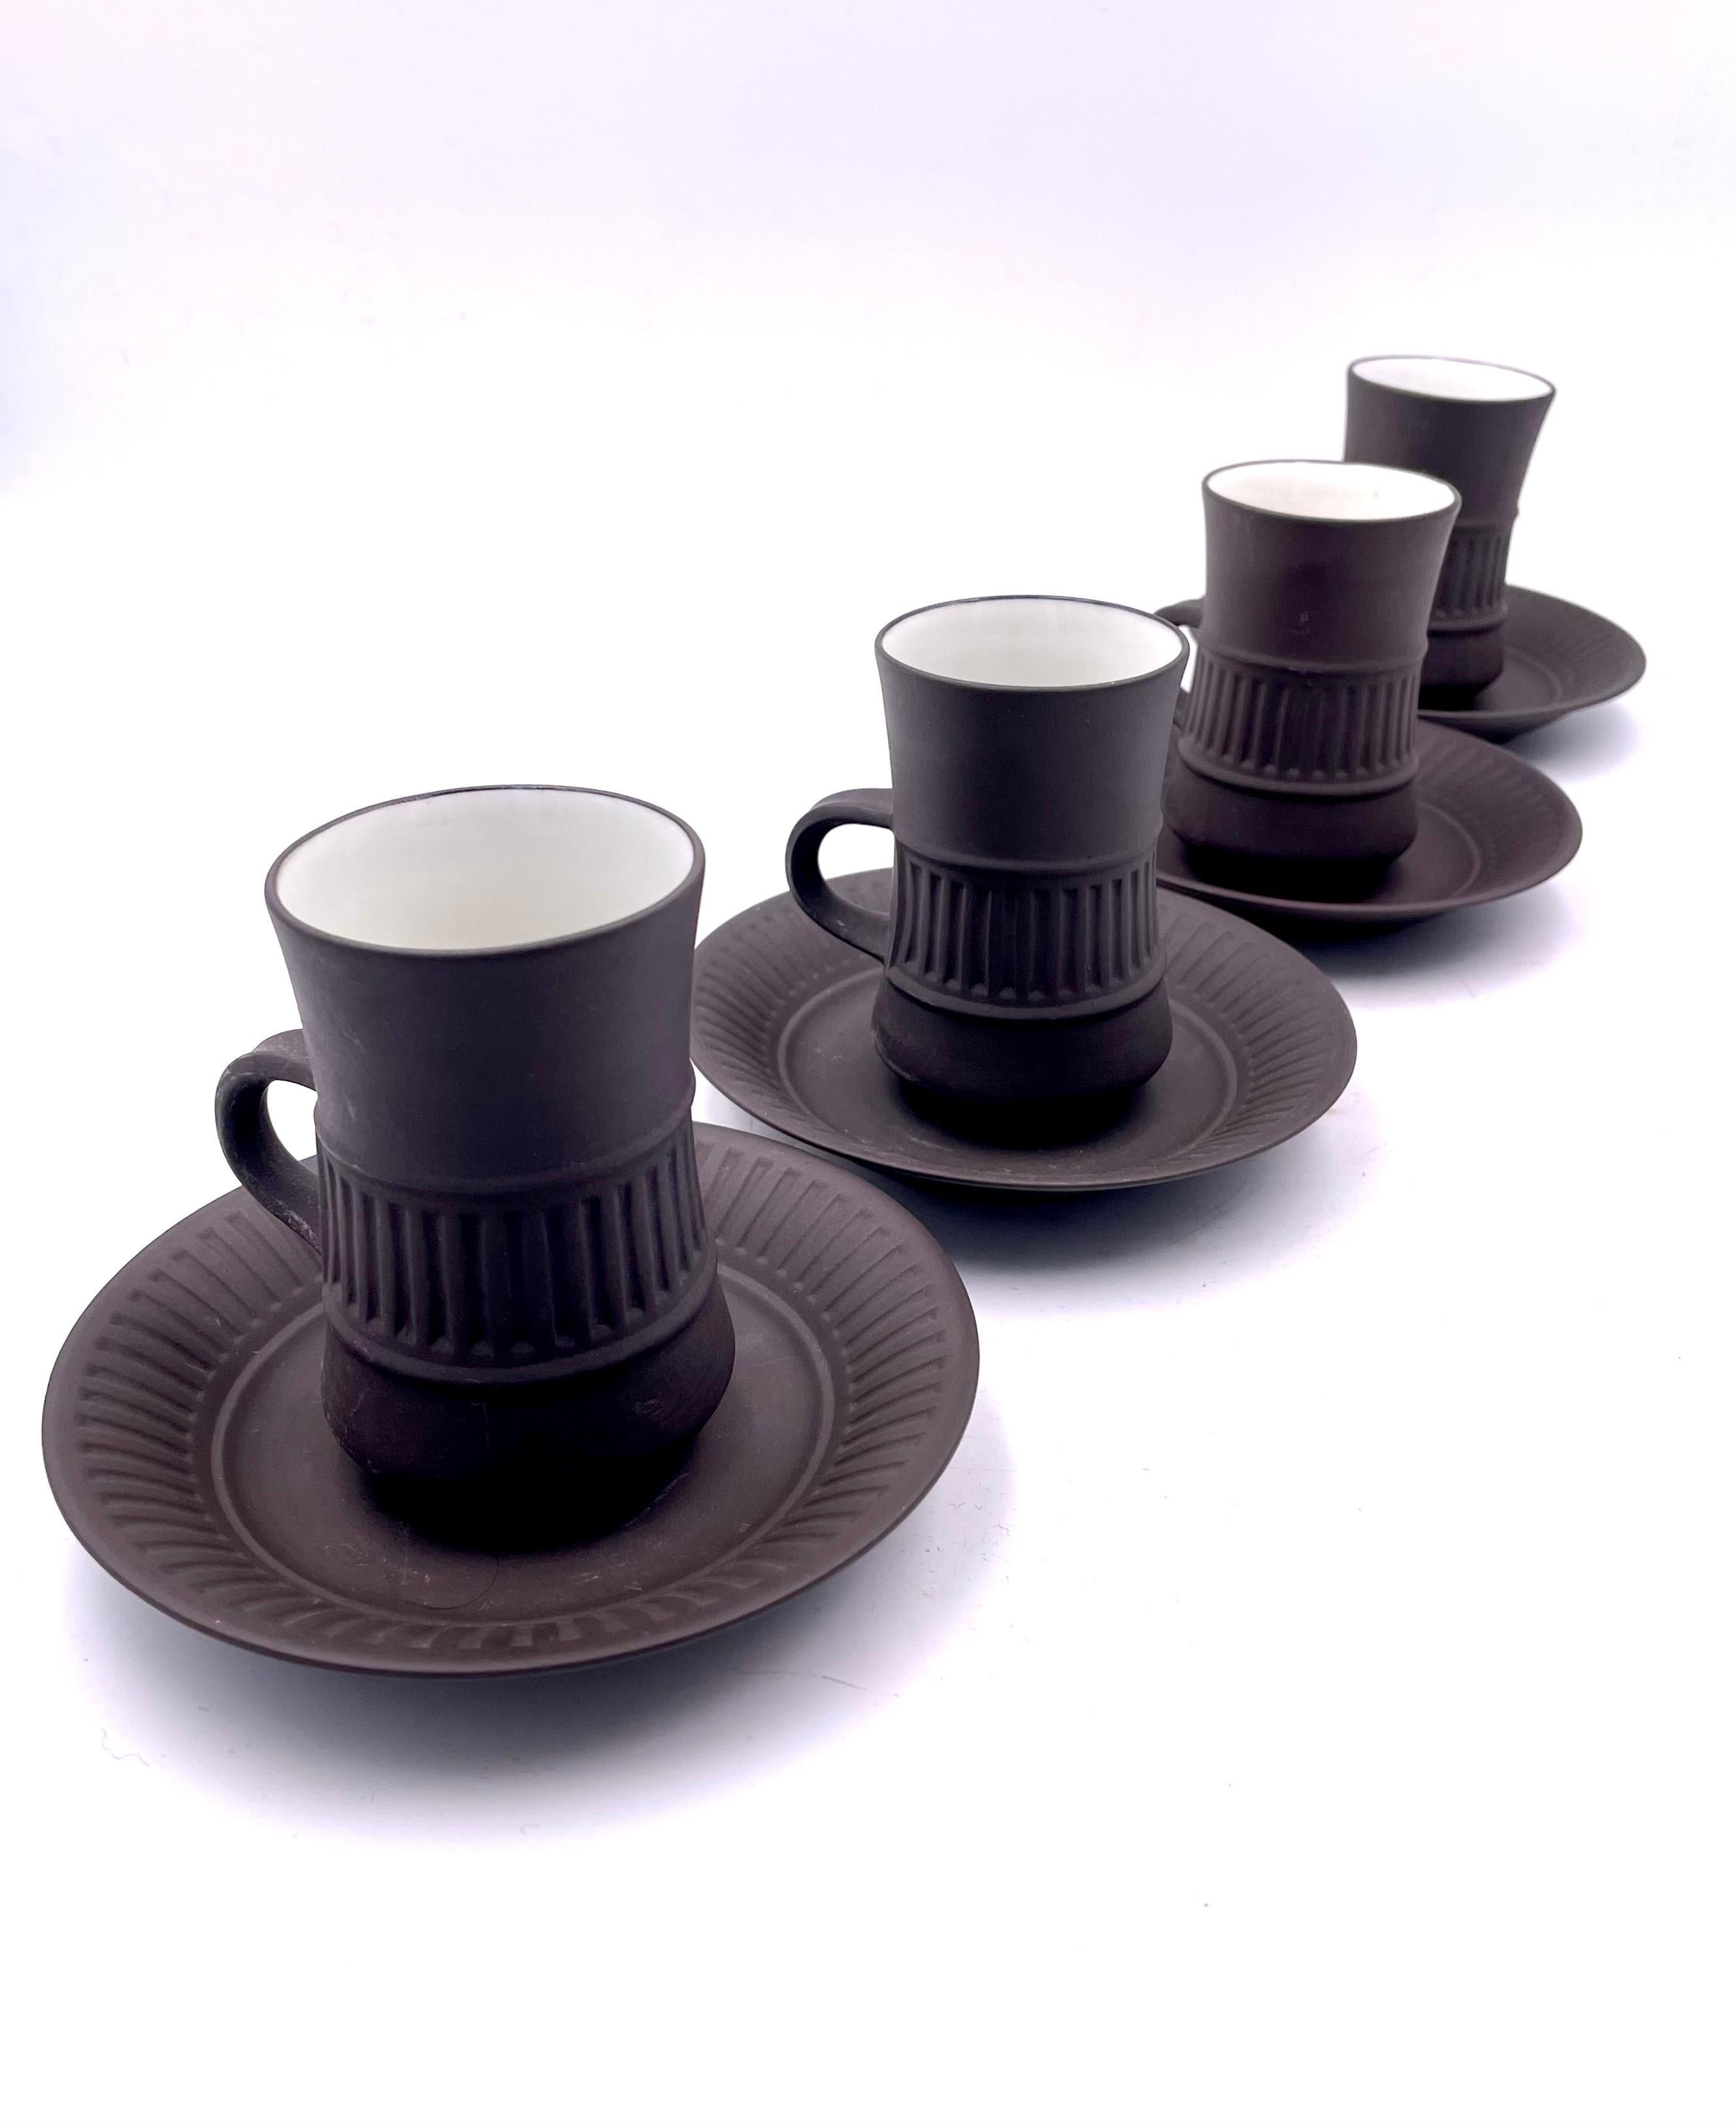 elegant set of 4 Espresso/coffee cups and saucers each plate its 5